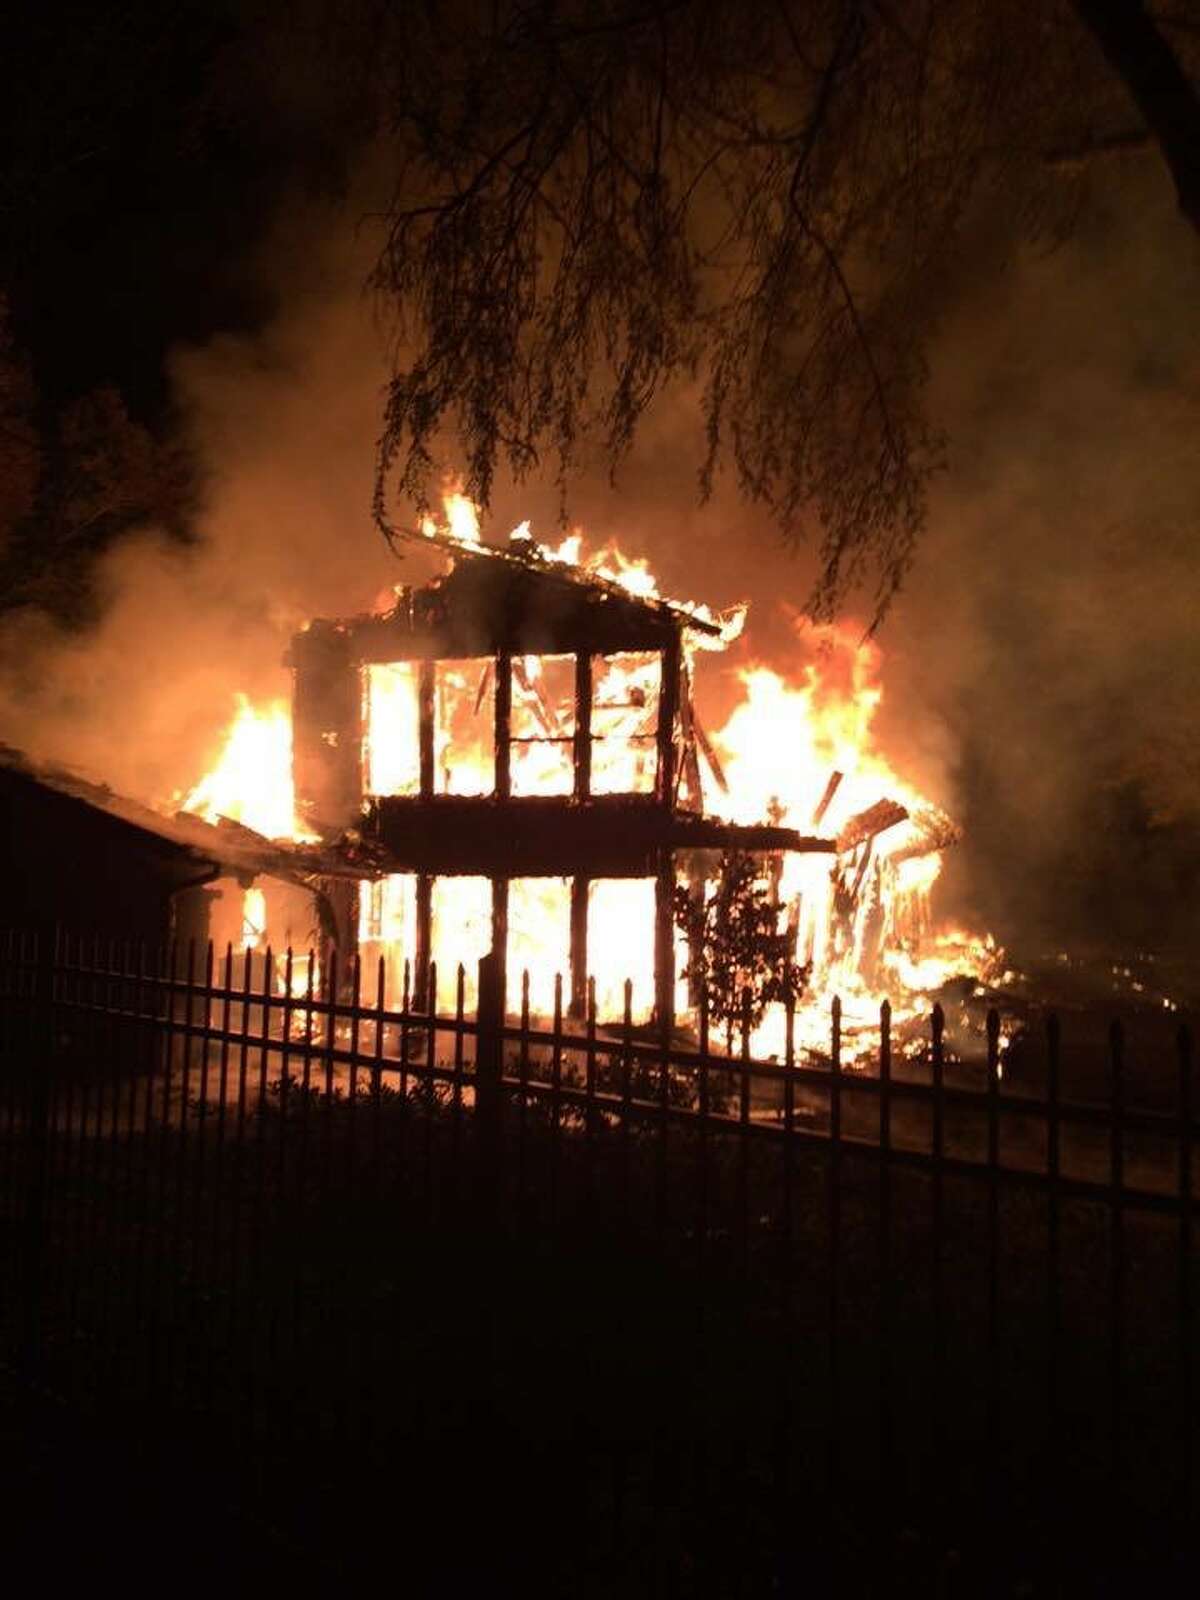 An East Texas house belonging to the grandfather of Cleveland Browns quarterback Johnny Manziel burned down during a fire early Wednesday morning. KLTV reported that Paul Manziel's home at 17859 Slack Road off Lake Tyler had collapsed by 2 a.m.